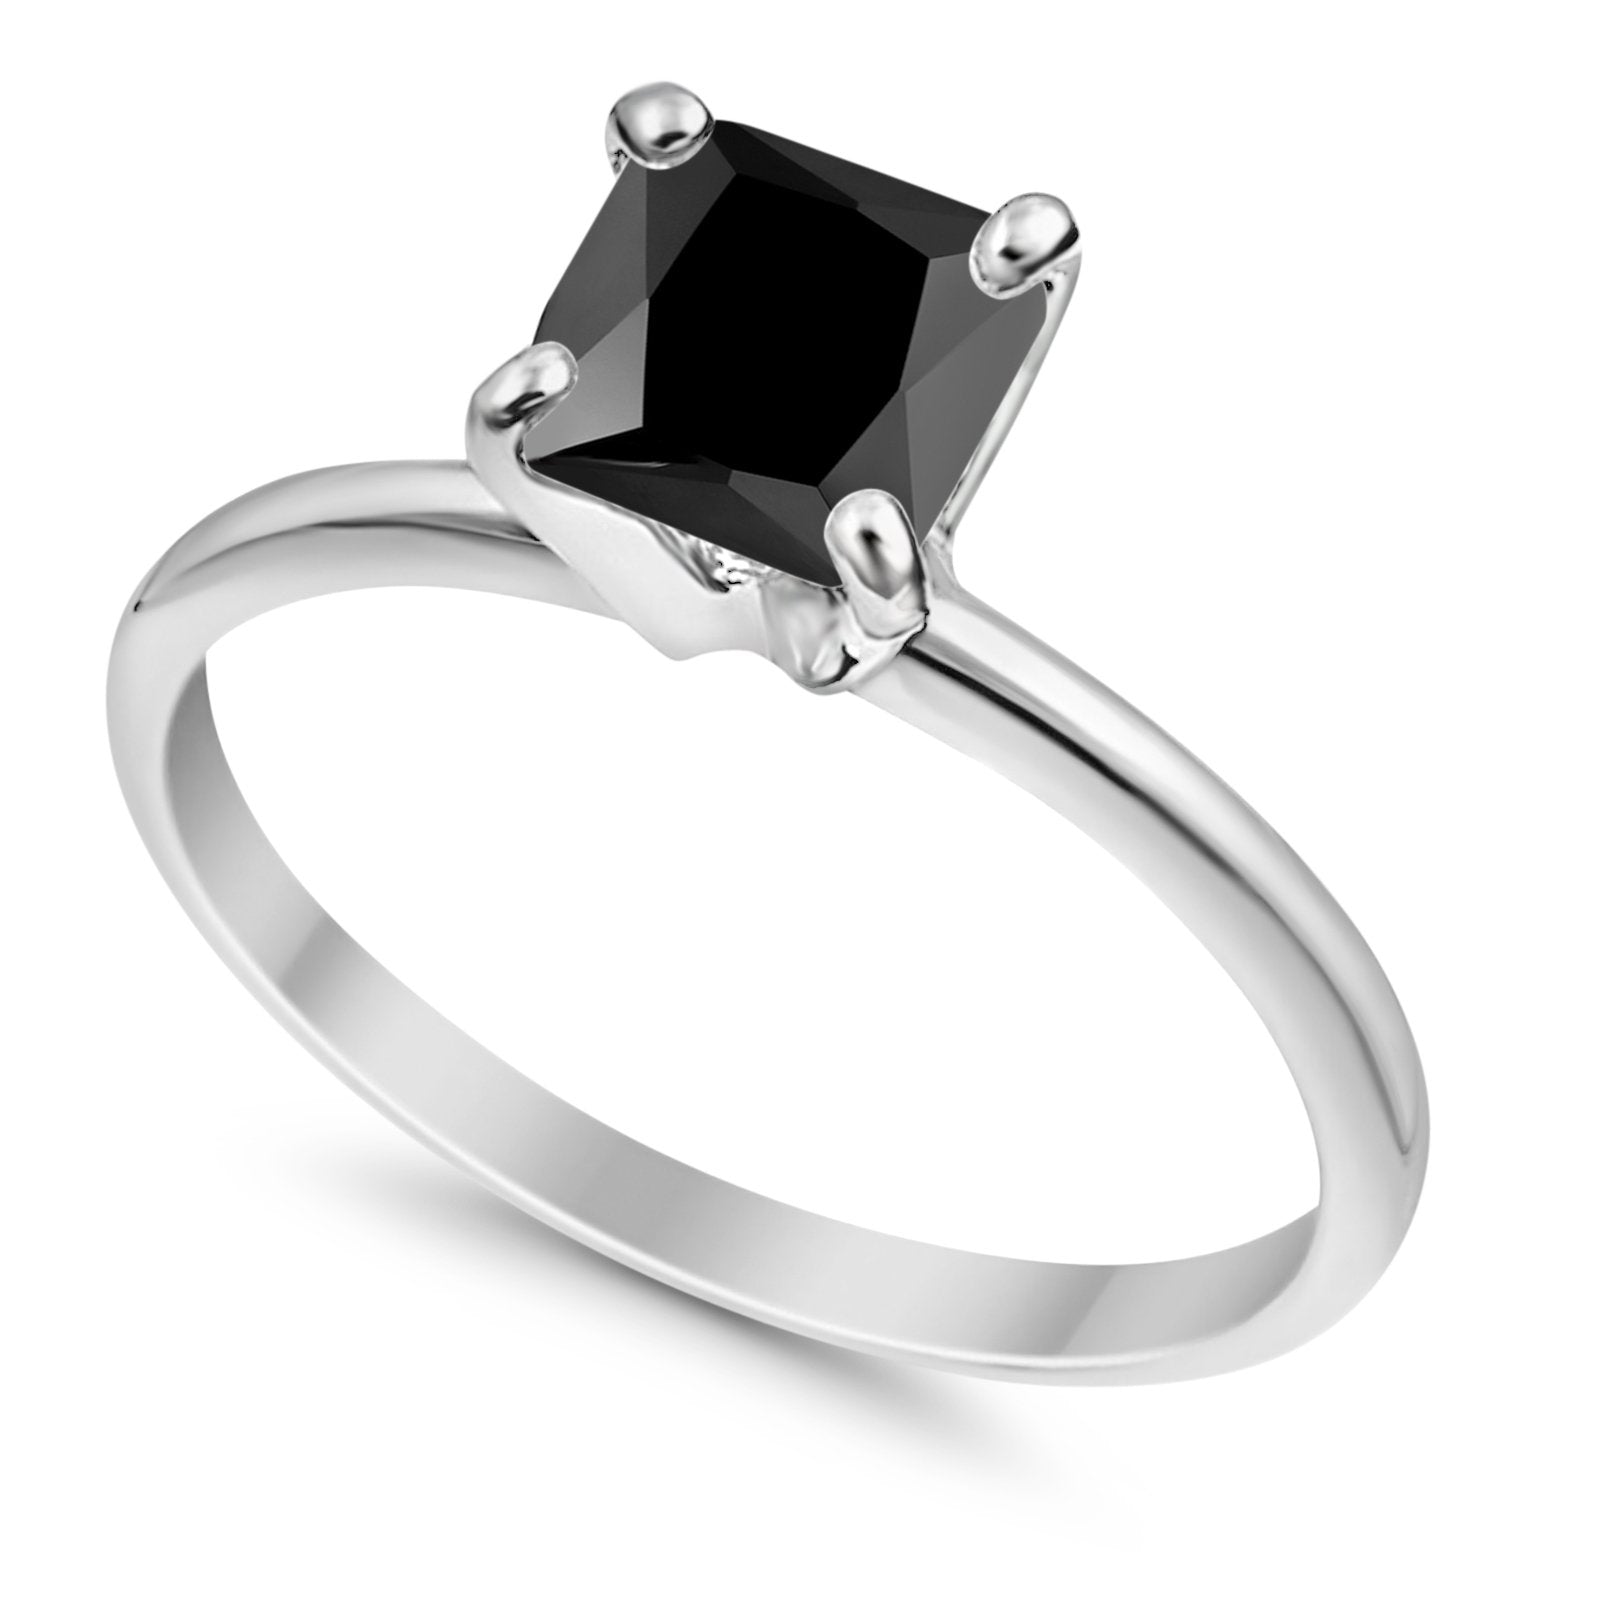 Solitaire Wedding Engagement Ring Princess Cut Simulated Black CZ 925 Sterling Silver